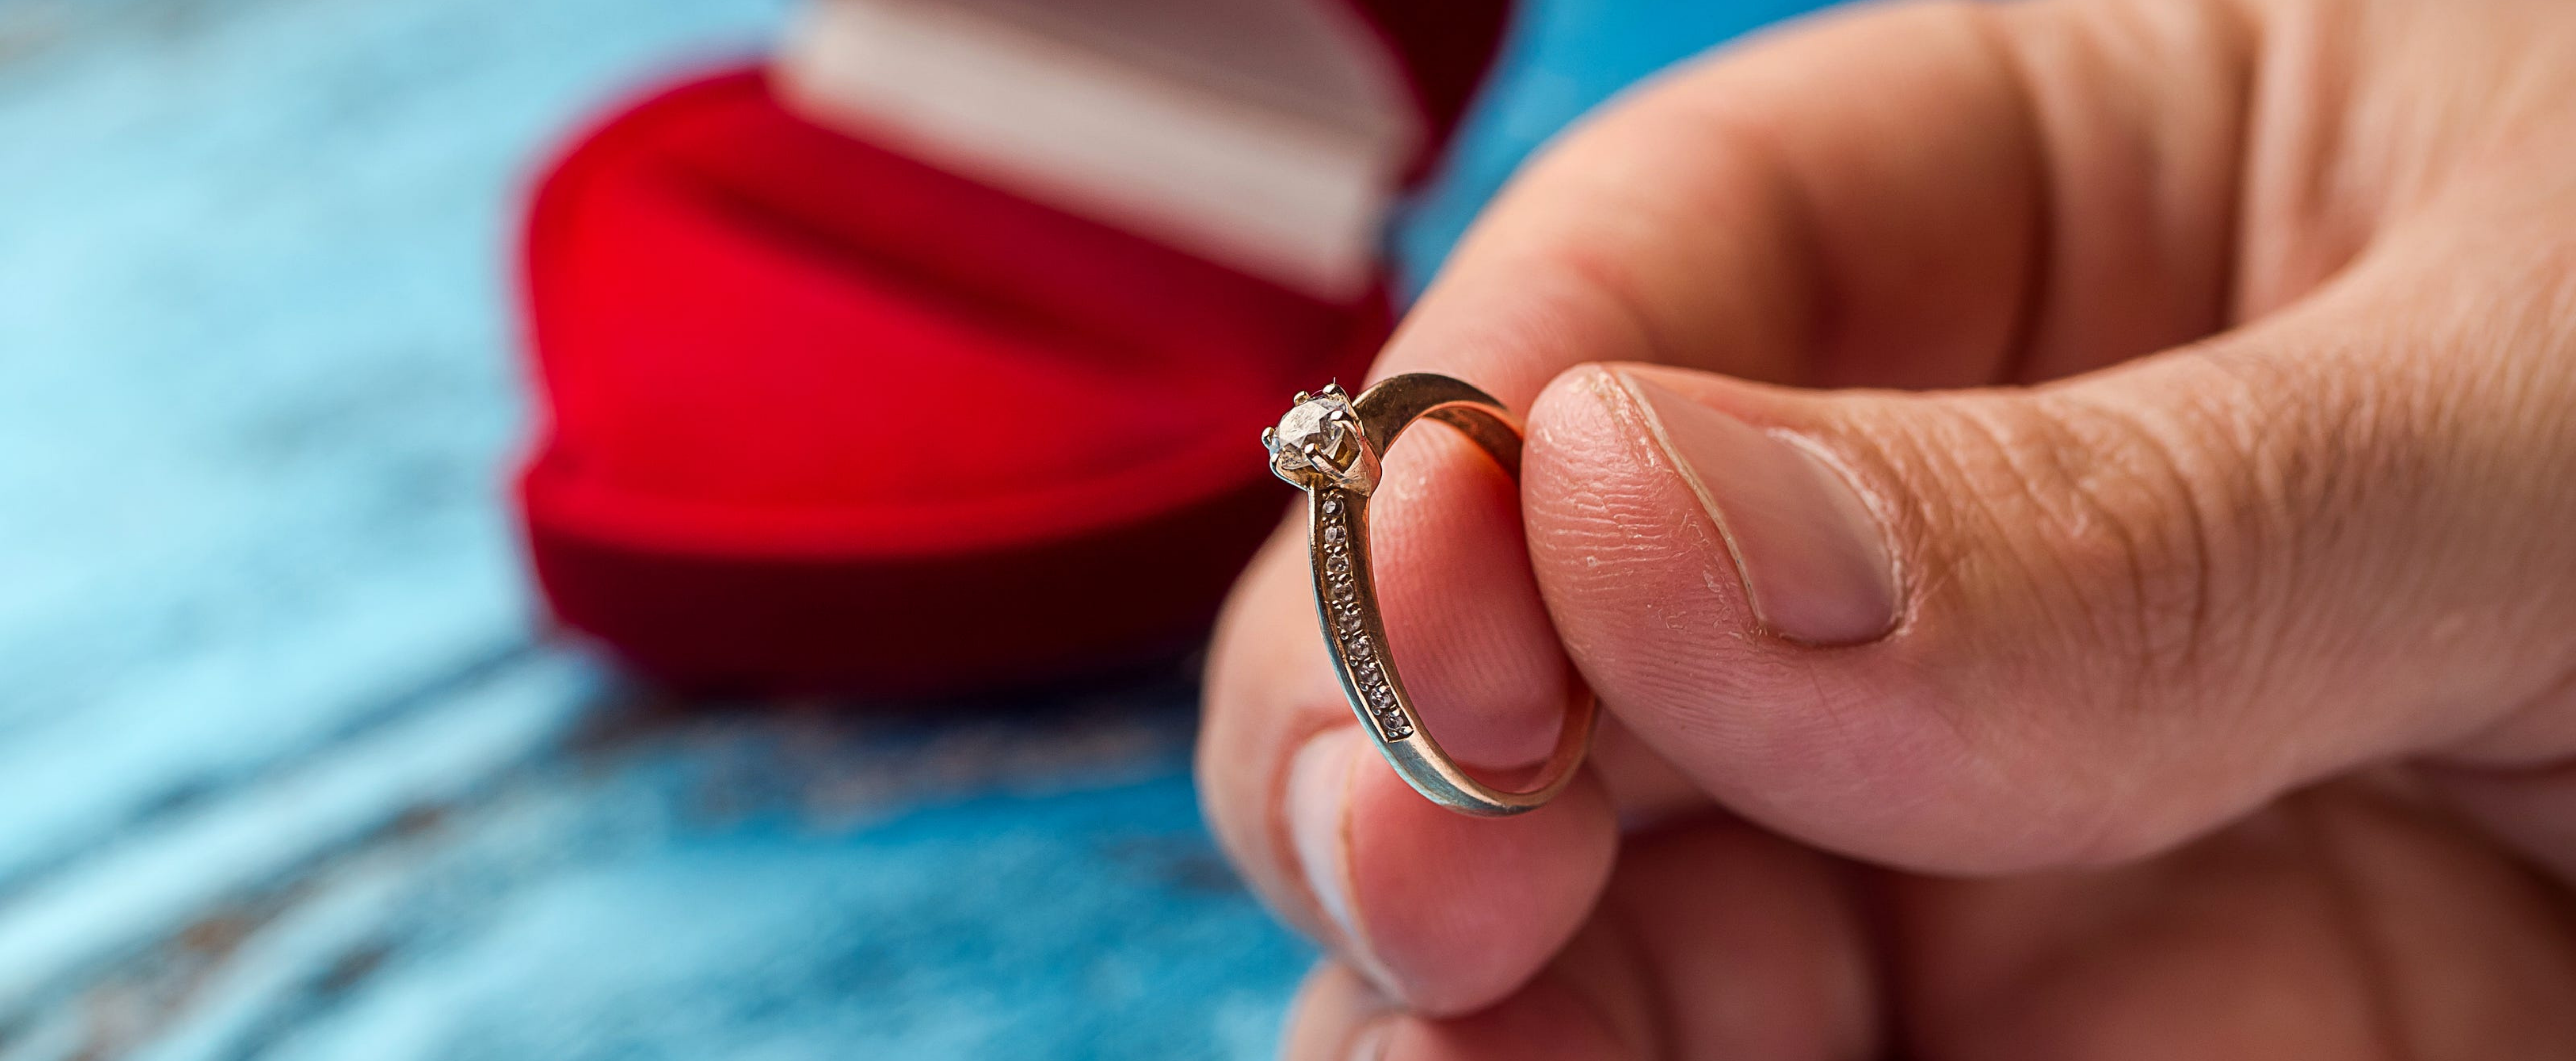 Exactly When to Take off Your Engagement Ring to keep Your Ring Sparkling